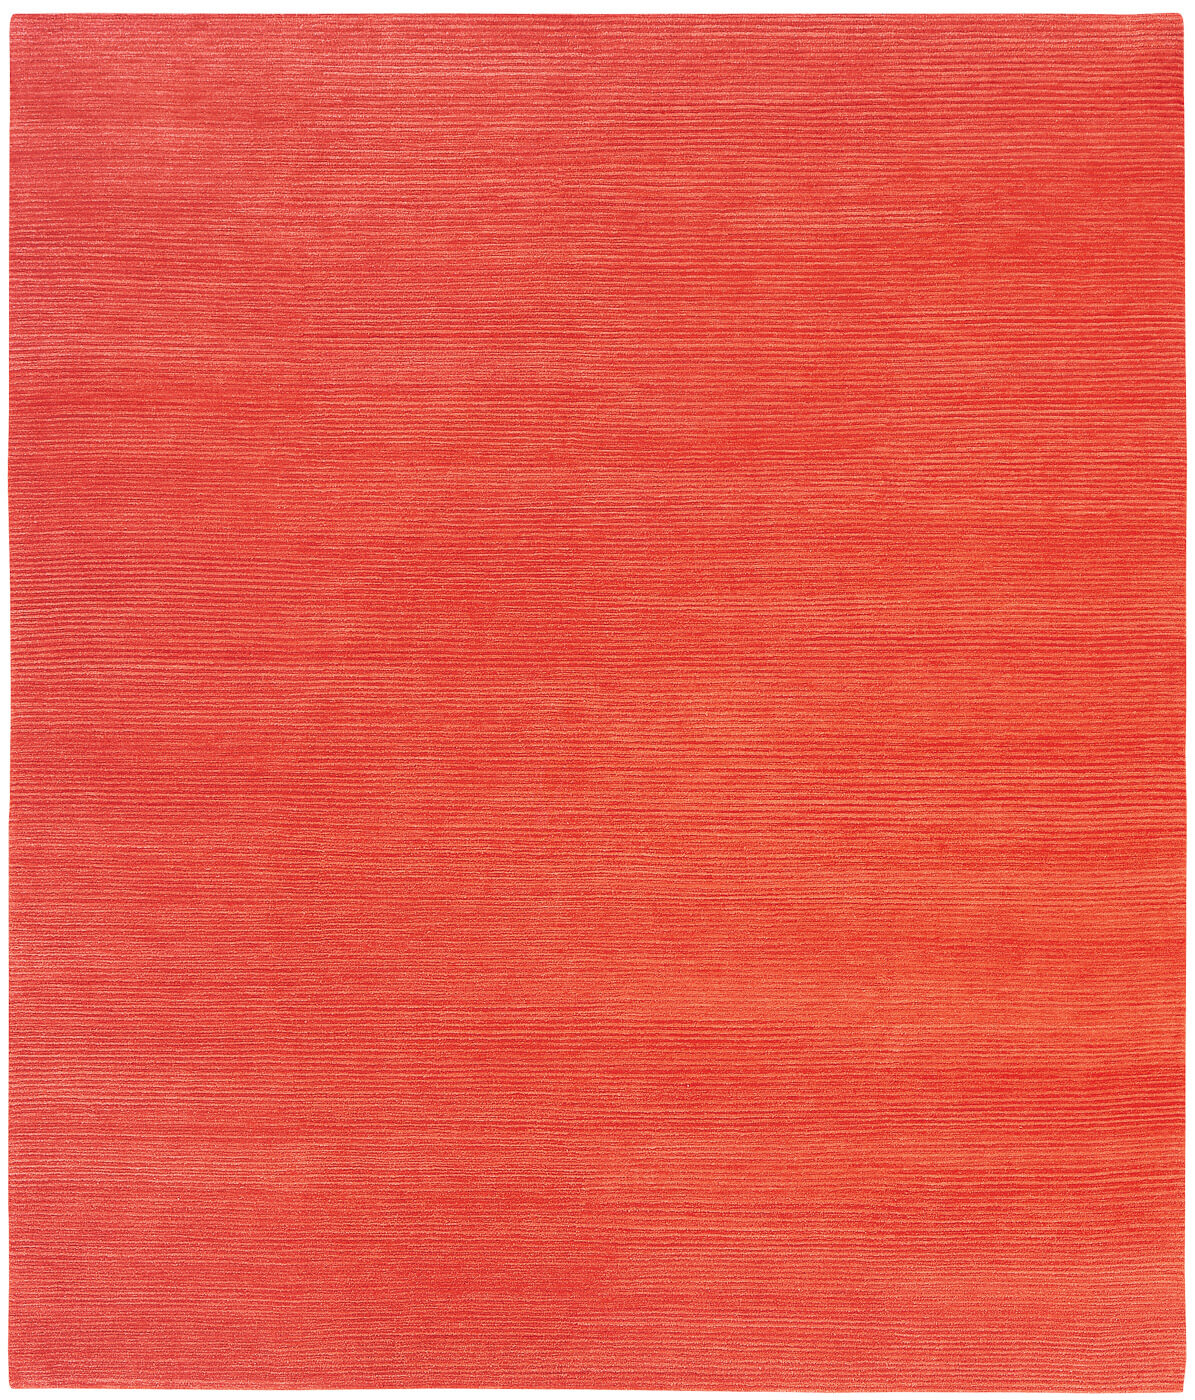 Full Deep Red Hand-woven Luxury Rug ☞ Size: 250 x 300 cm